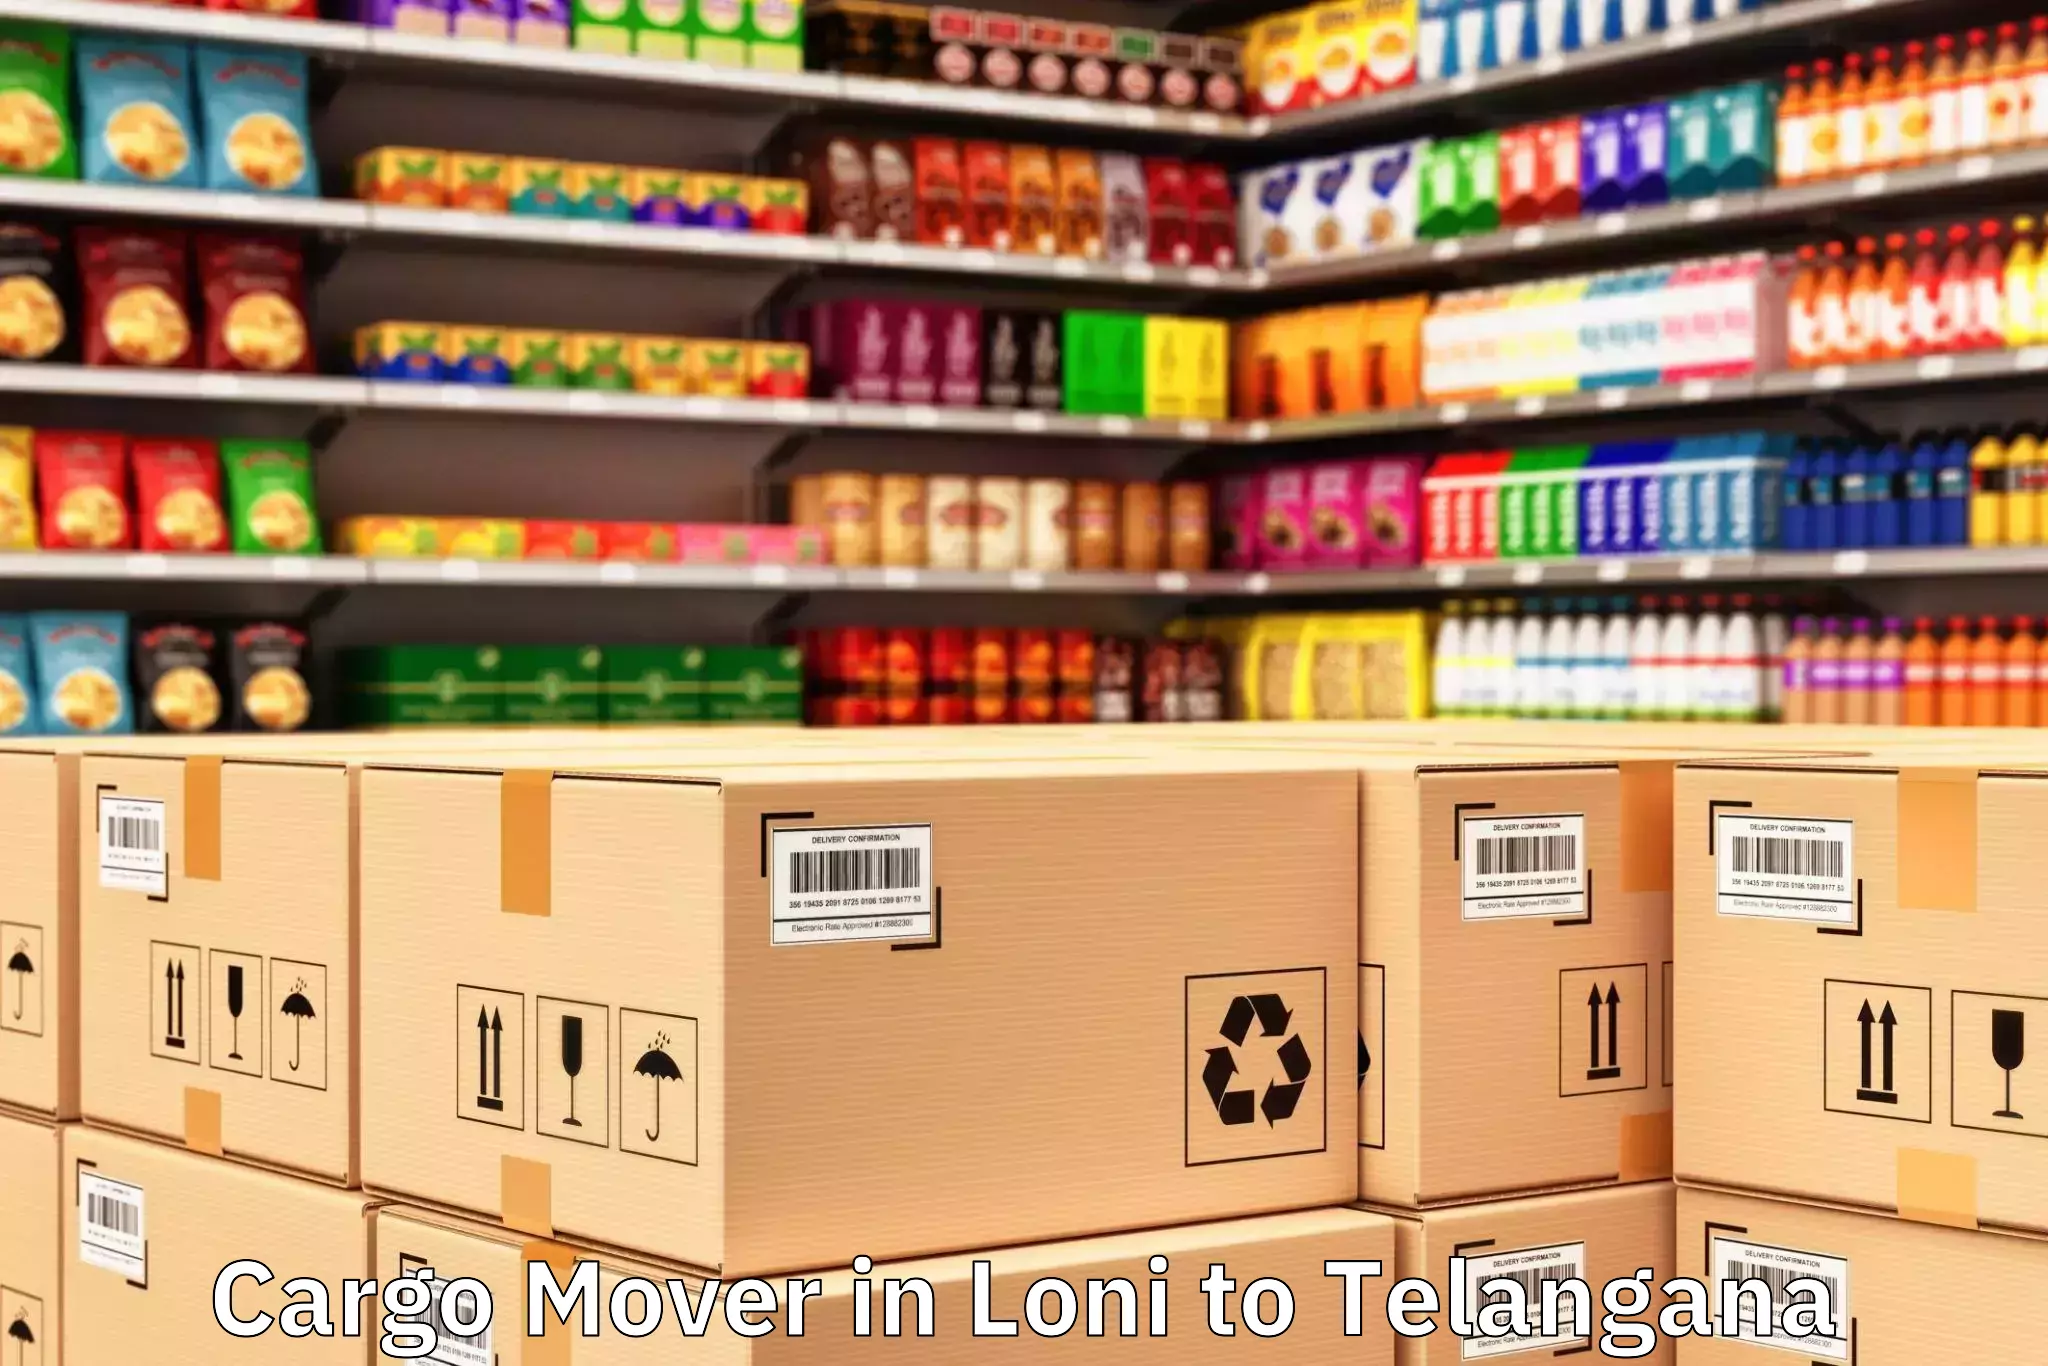 Discover Loni to Jawaharlal Nehru Technological University Hyderabad Cargo Mover